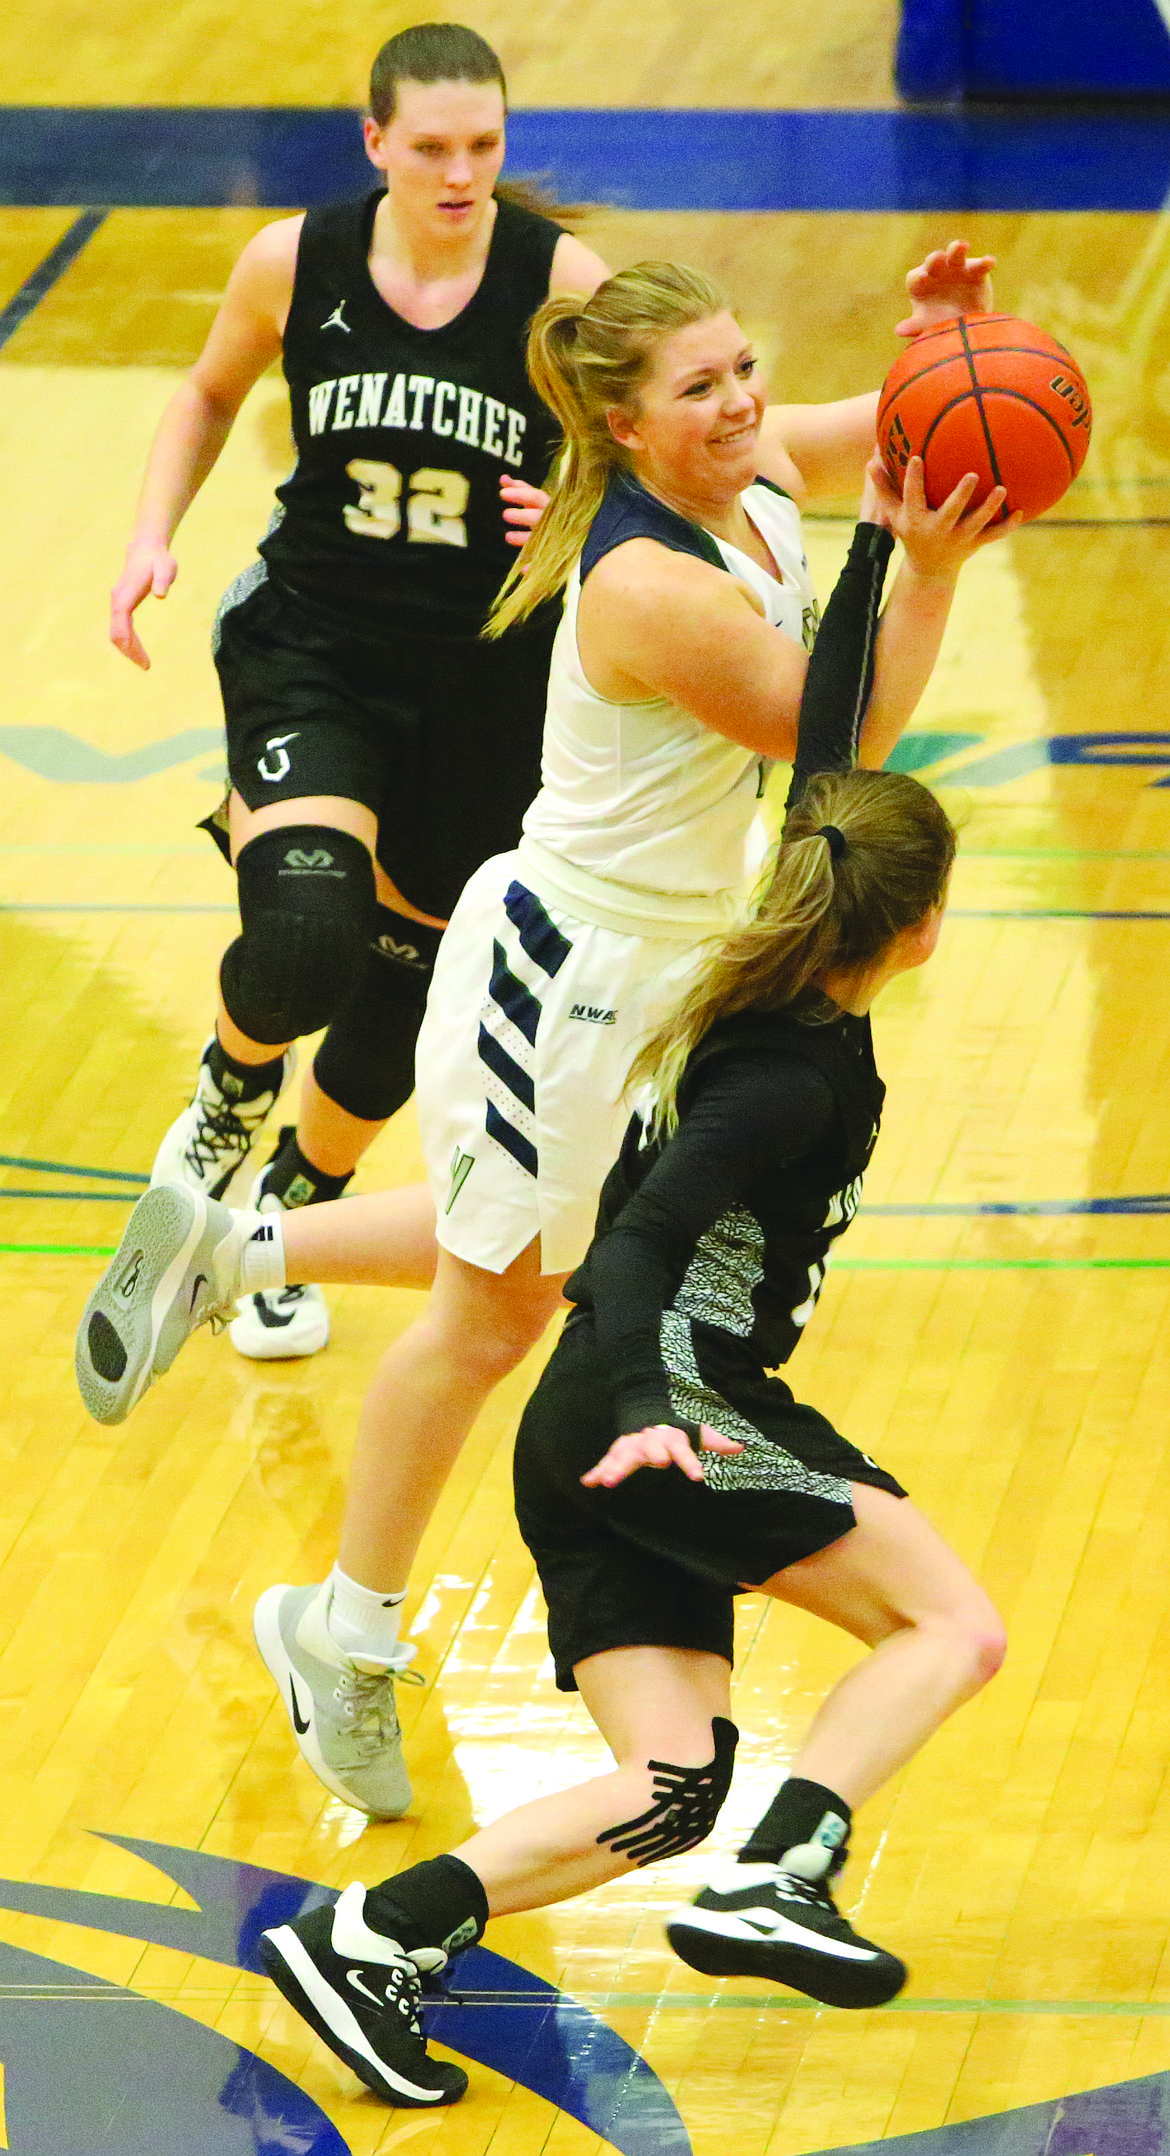 Connor Vanderweyst/Columbia Basin Herald | Big Bend’s Madi Fillmore receives a pass and is fouled near midcourt against Wenatchee Valley.